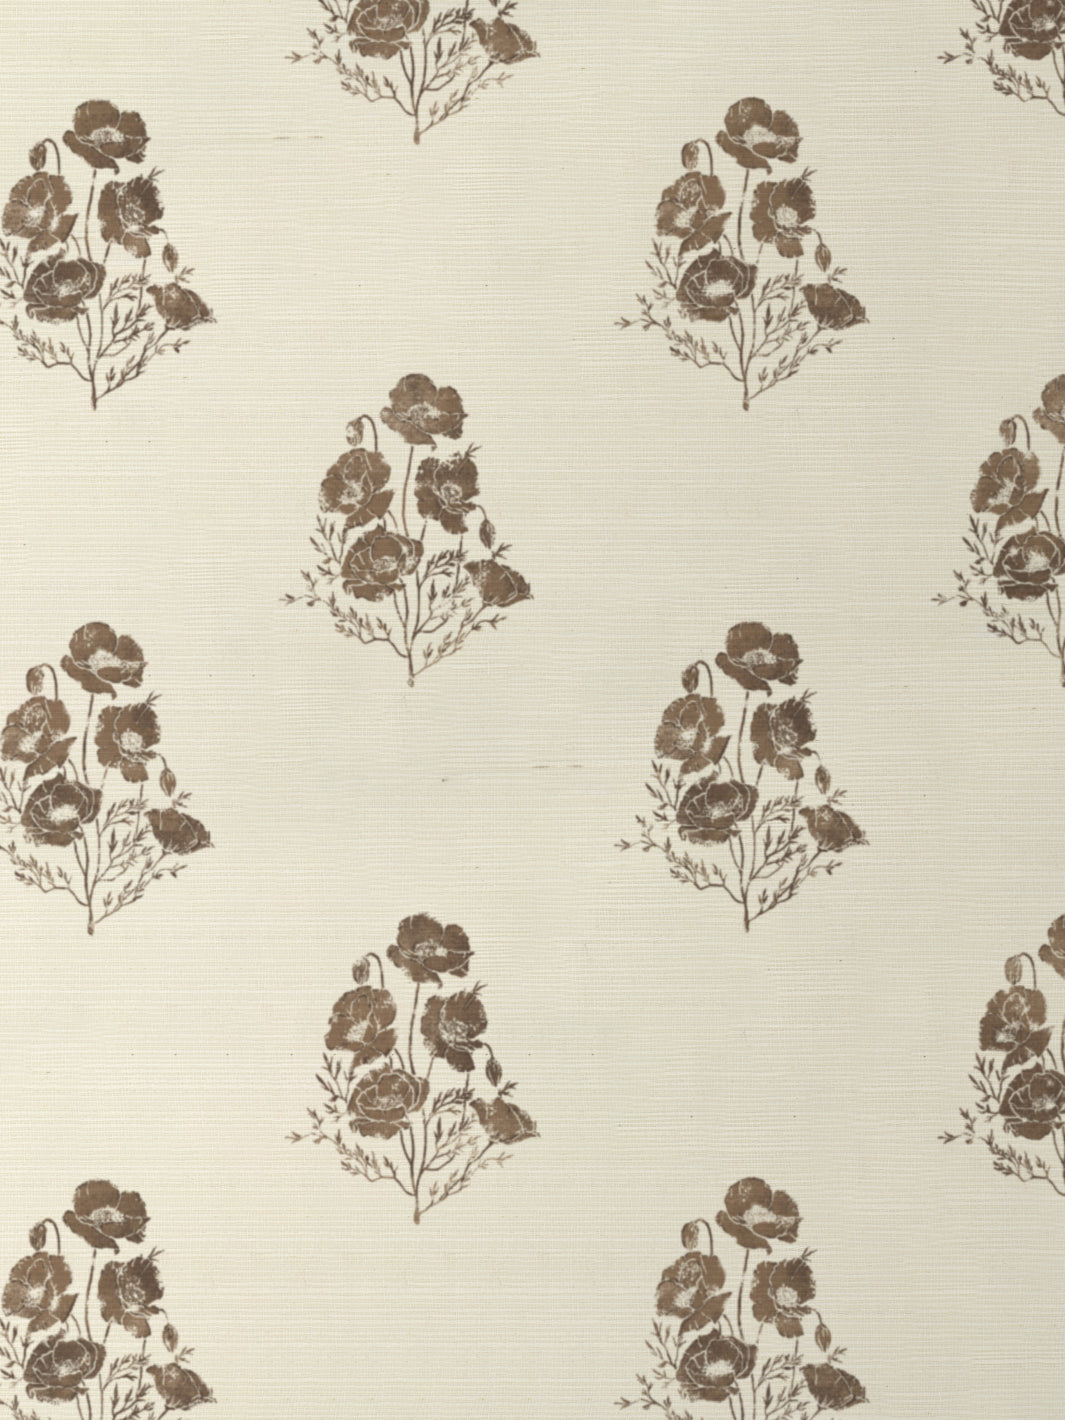 'California Poppy' Grasscloth Wallpaper by Nathan Turner - Brown